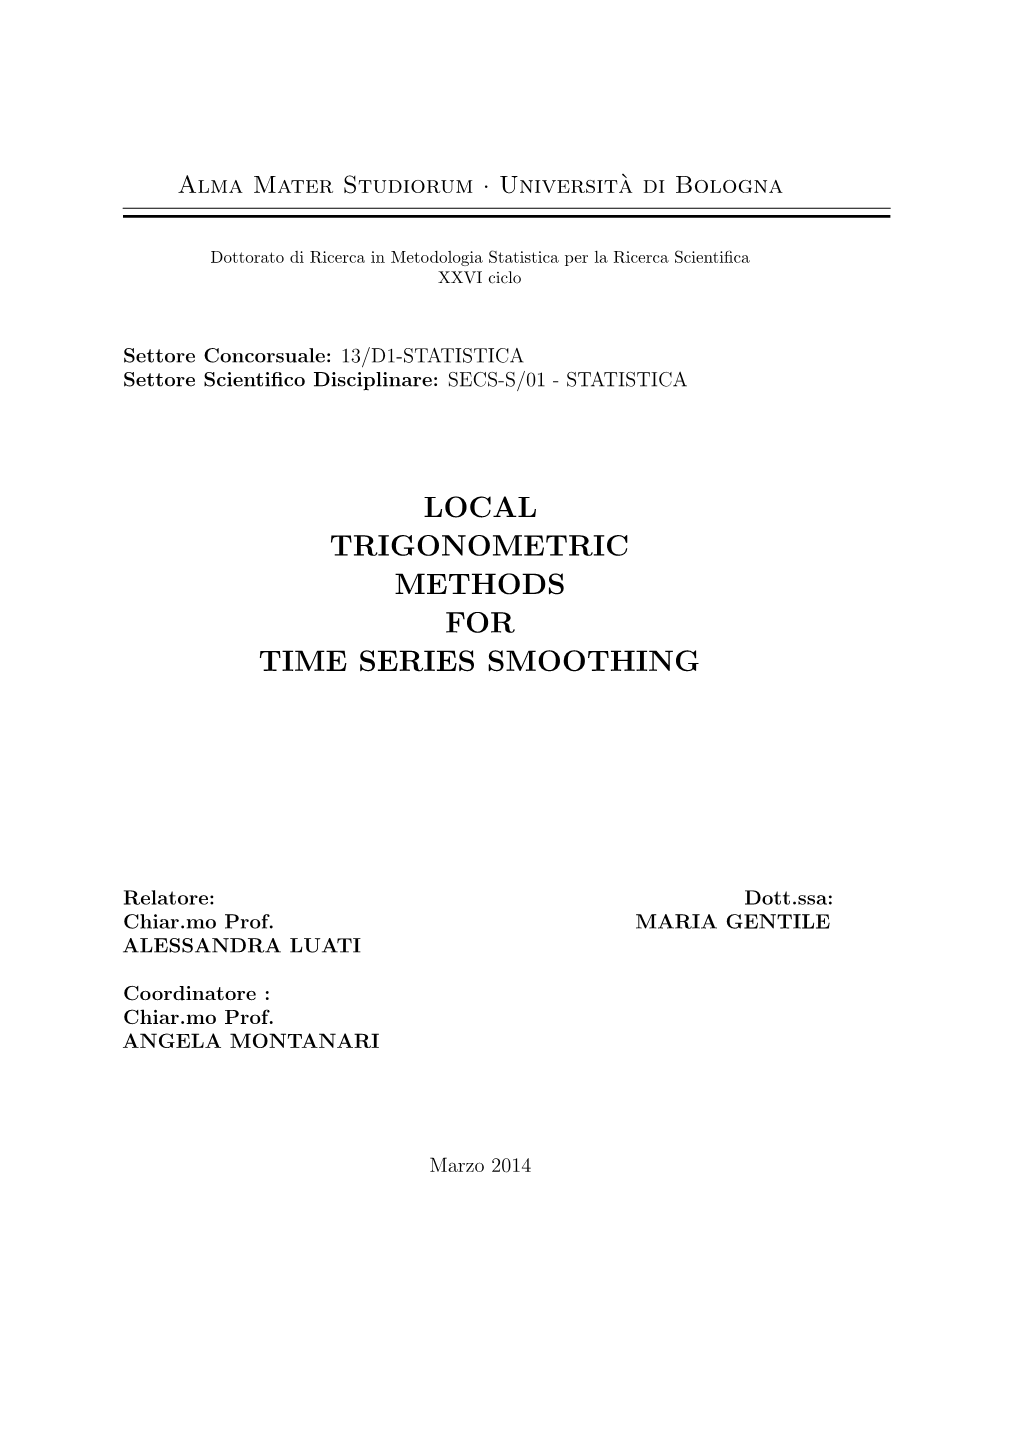 Local Trigonometric Methods for Time Series Smoothing